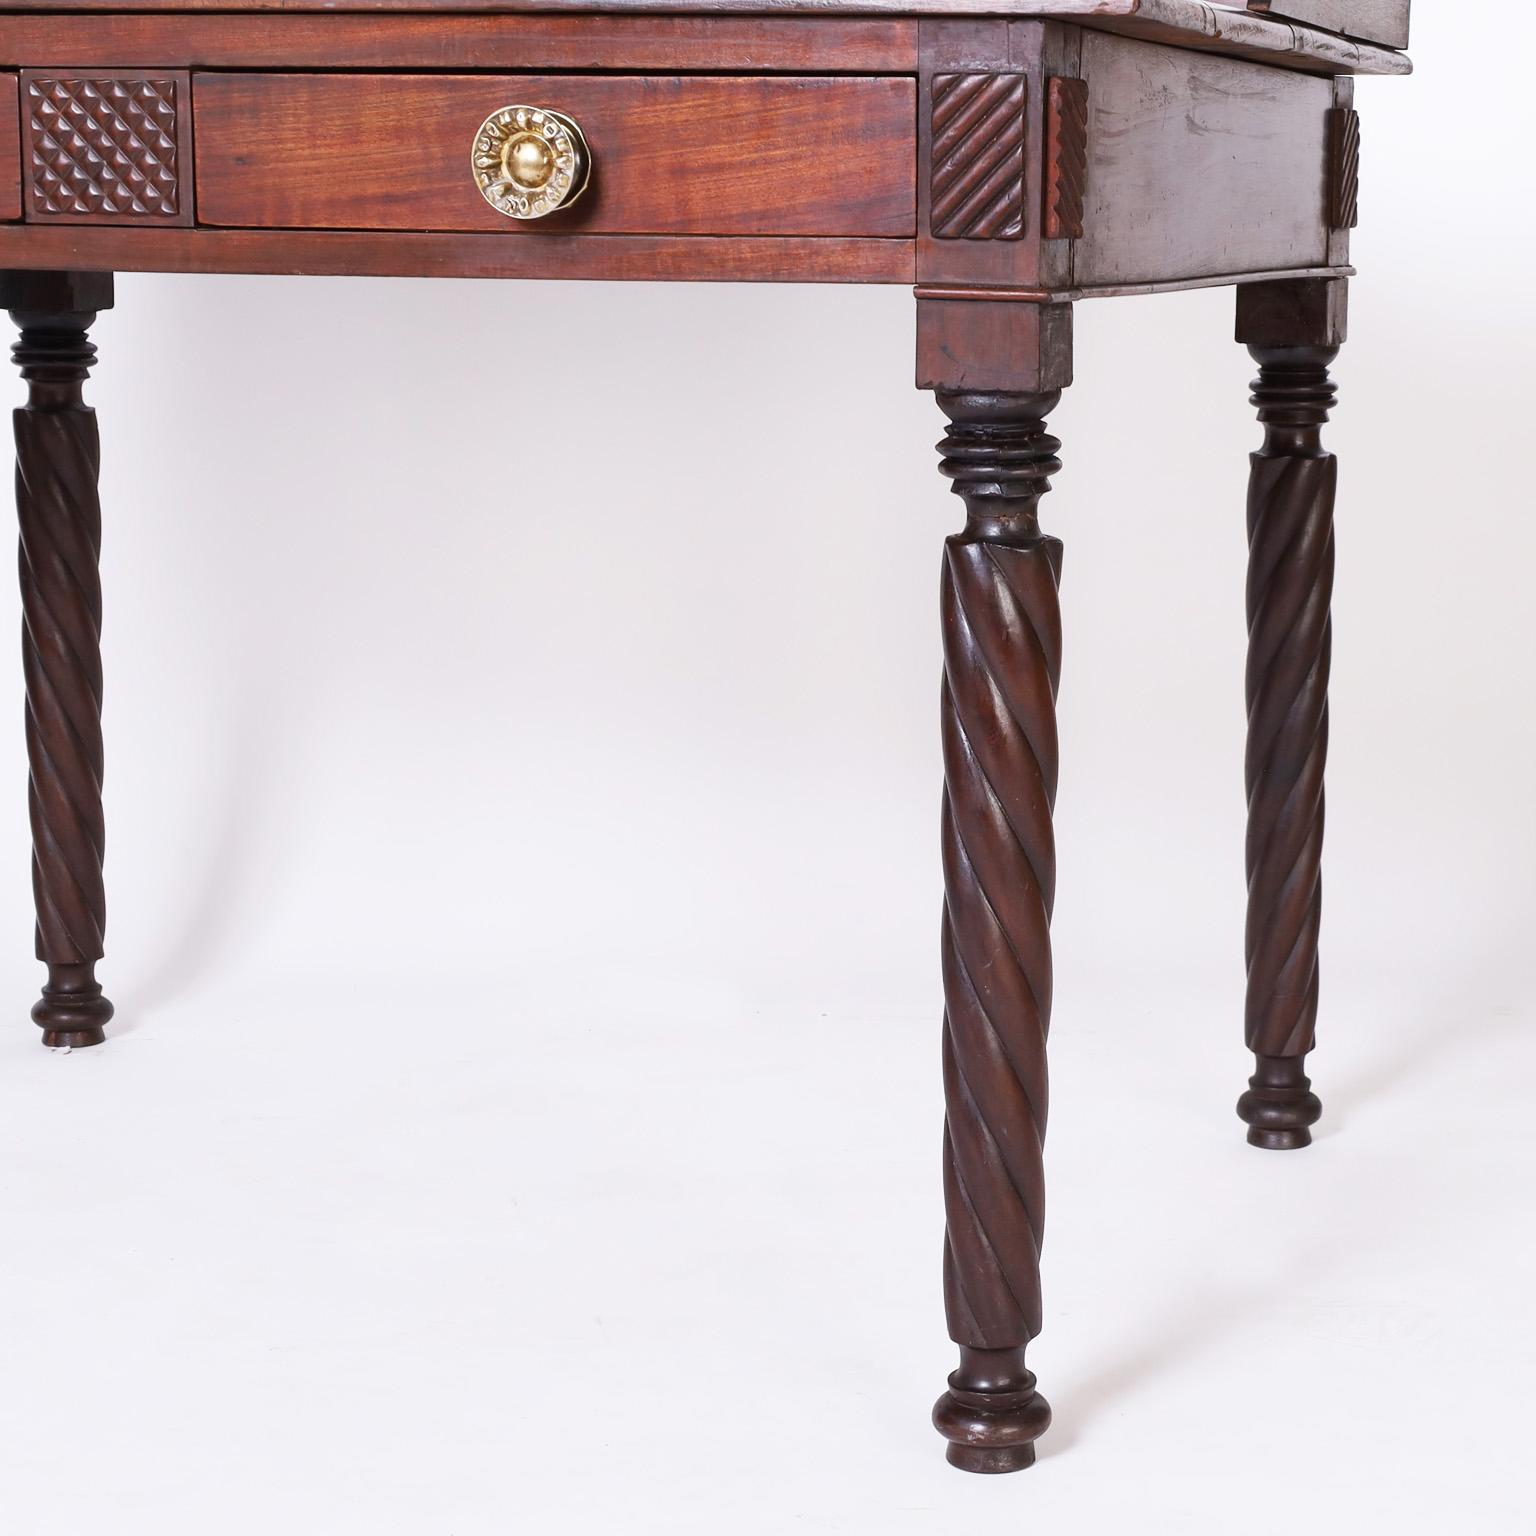 19th Century British Colonial West Indies Server or Writing Table For Sale